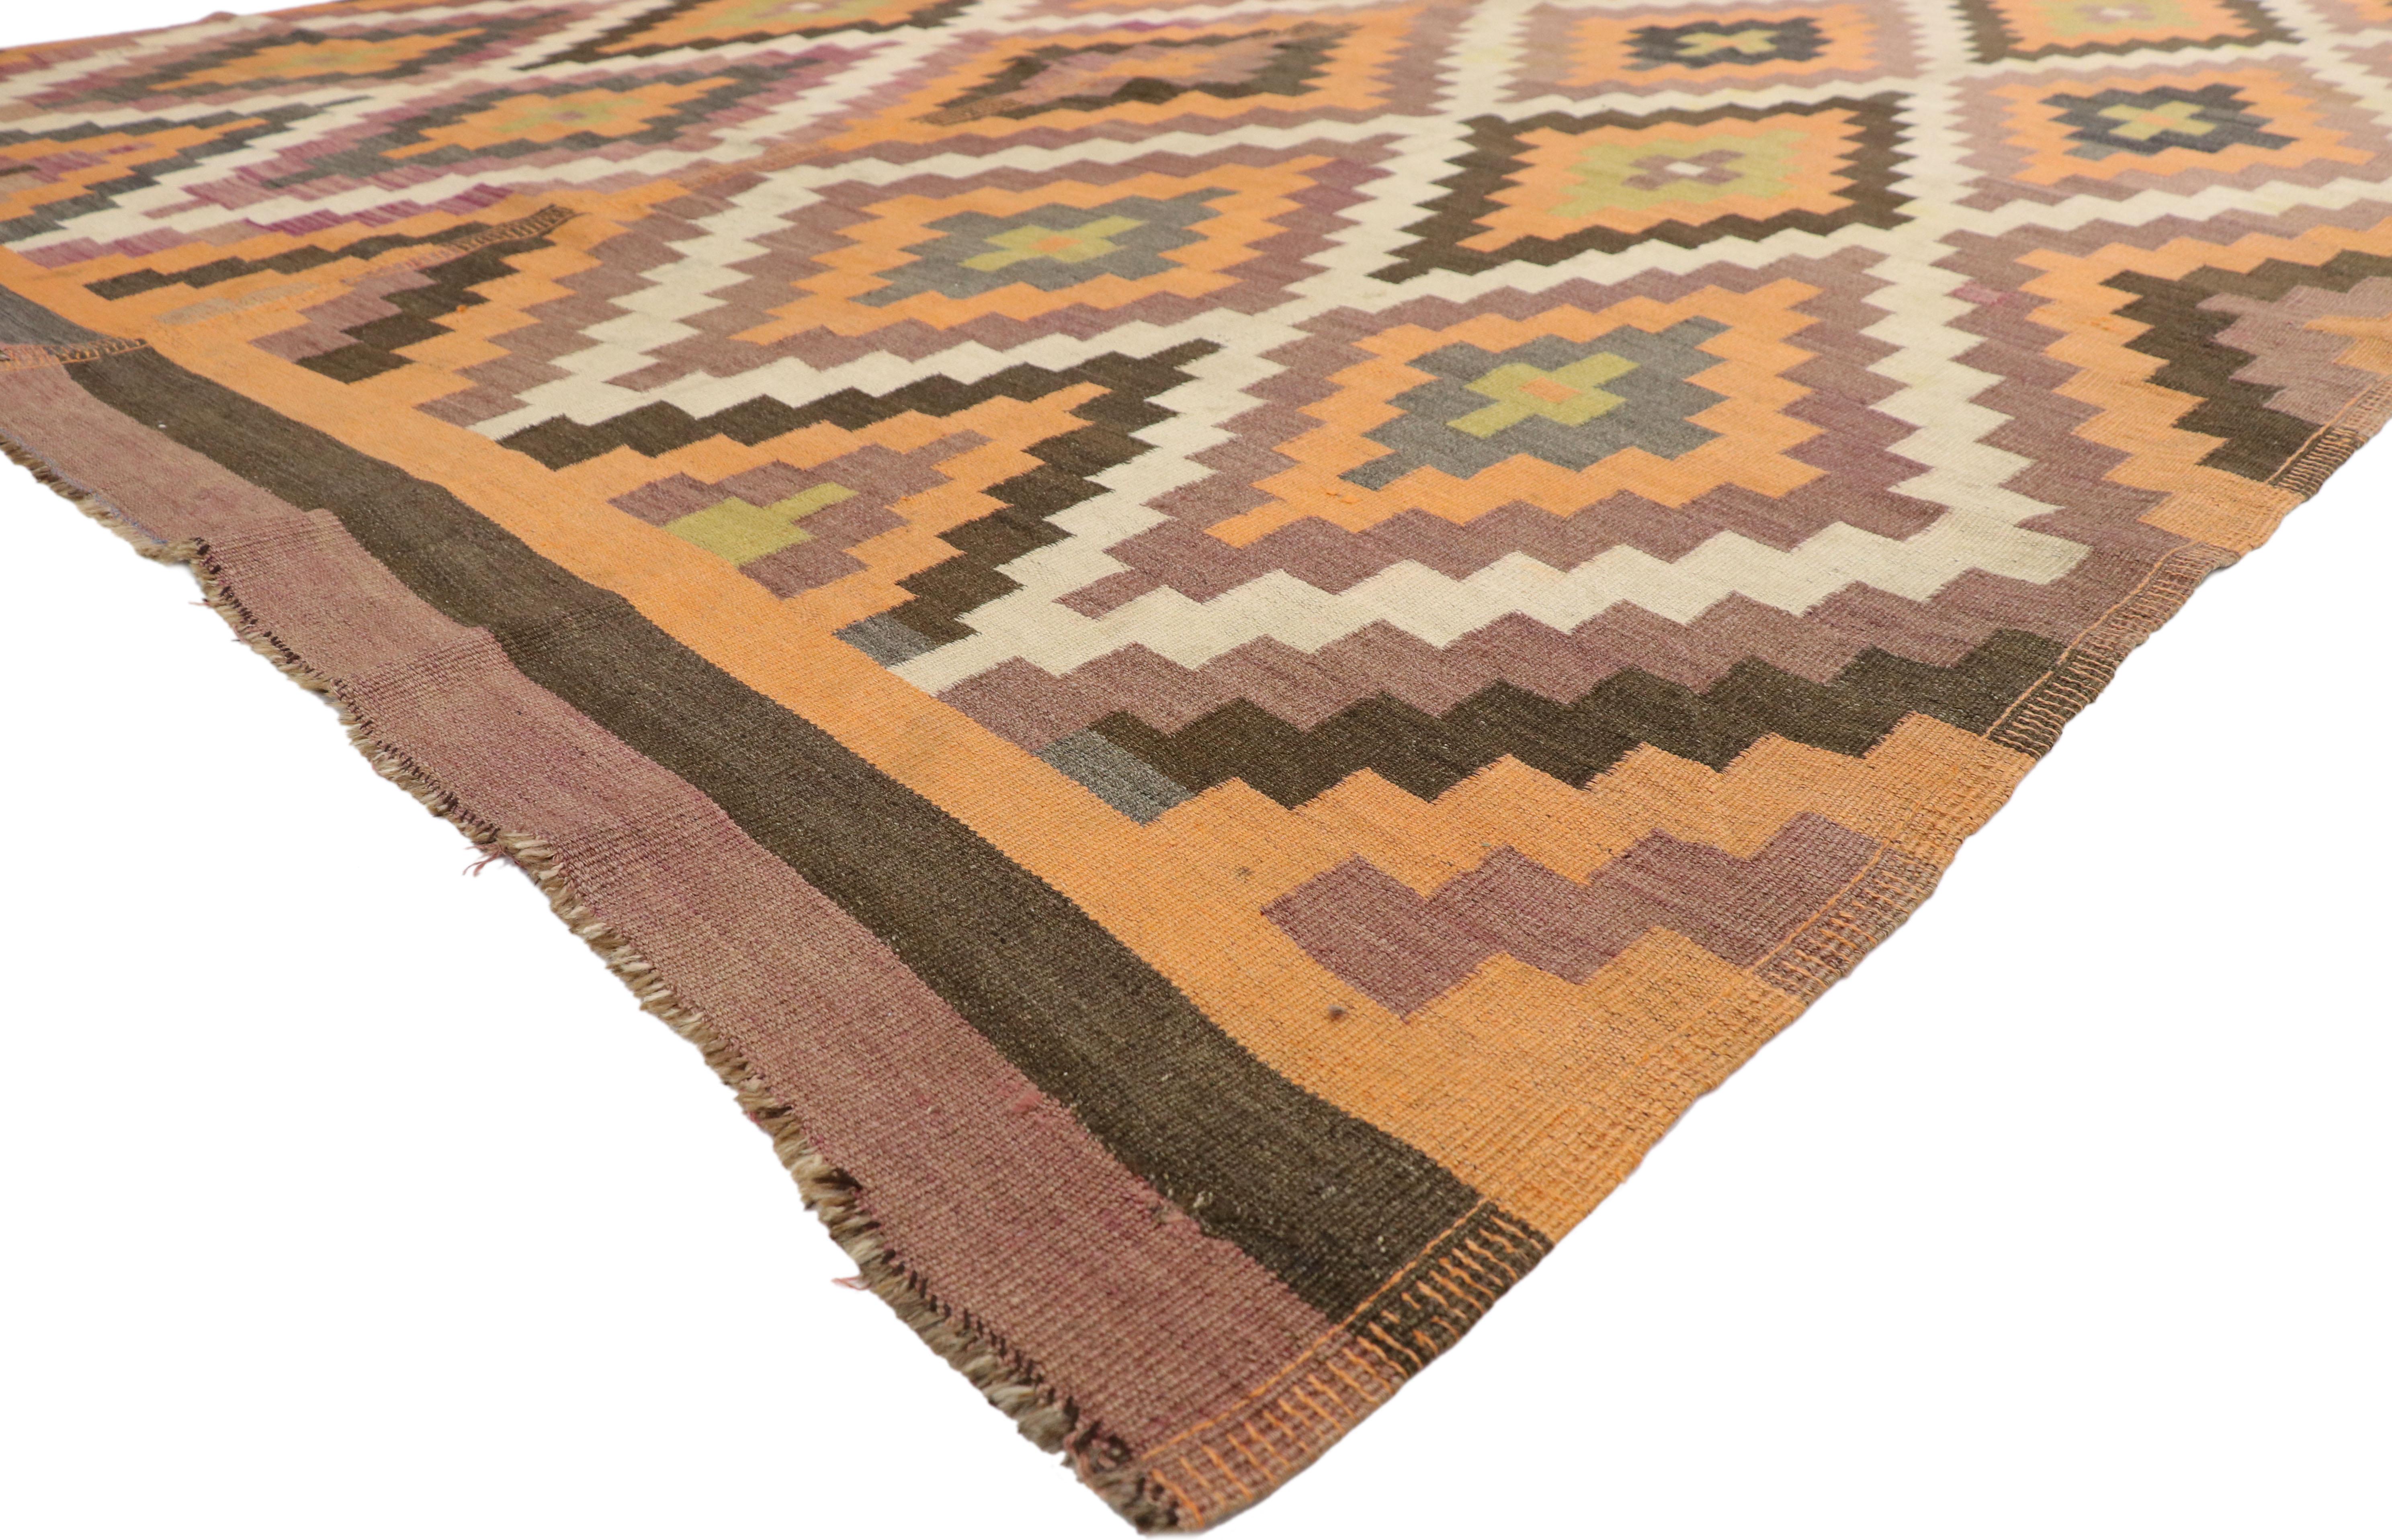 73394, semi-antique Turkish Kilim rug with Southwestern Bohemian style. This handwoven wool antique Turkish Kilim rug features an all-over geometric pattern composed of stepped lozenges. Well-suited for a wide range of interior styles: Navajo,